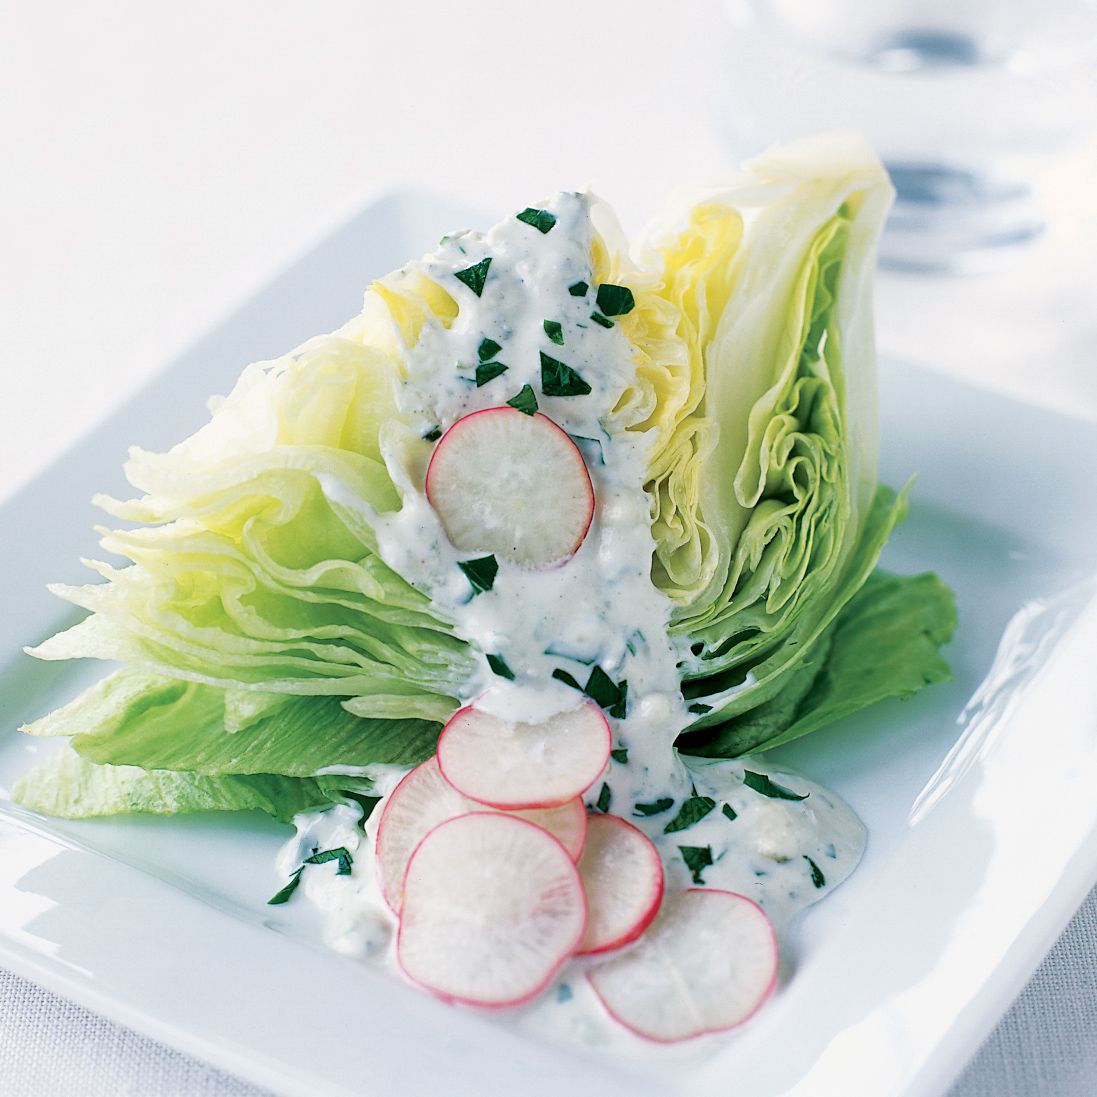 Iceberg Wedges with Blue Cheese Dressing 